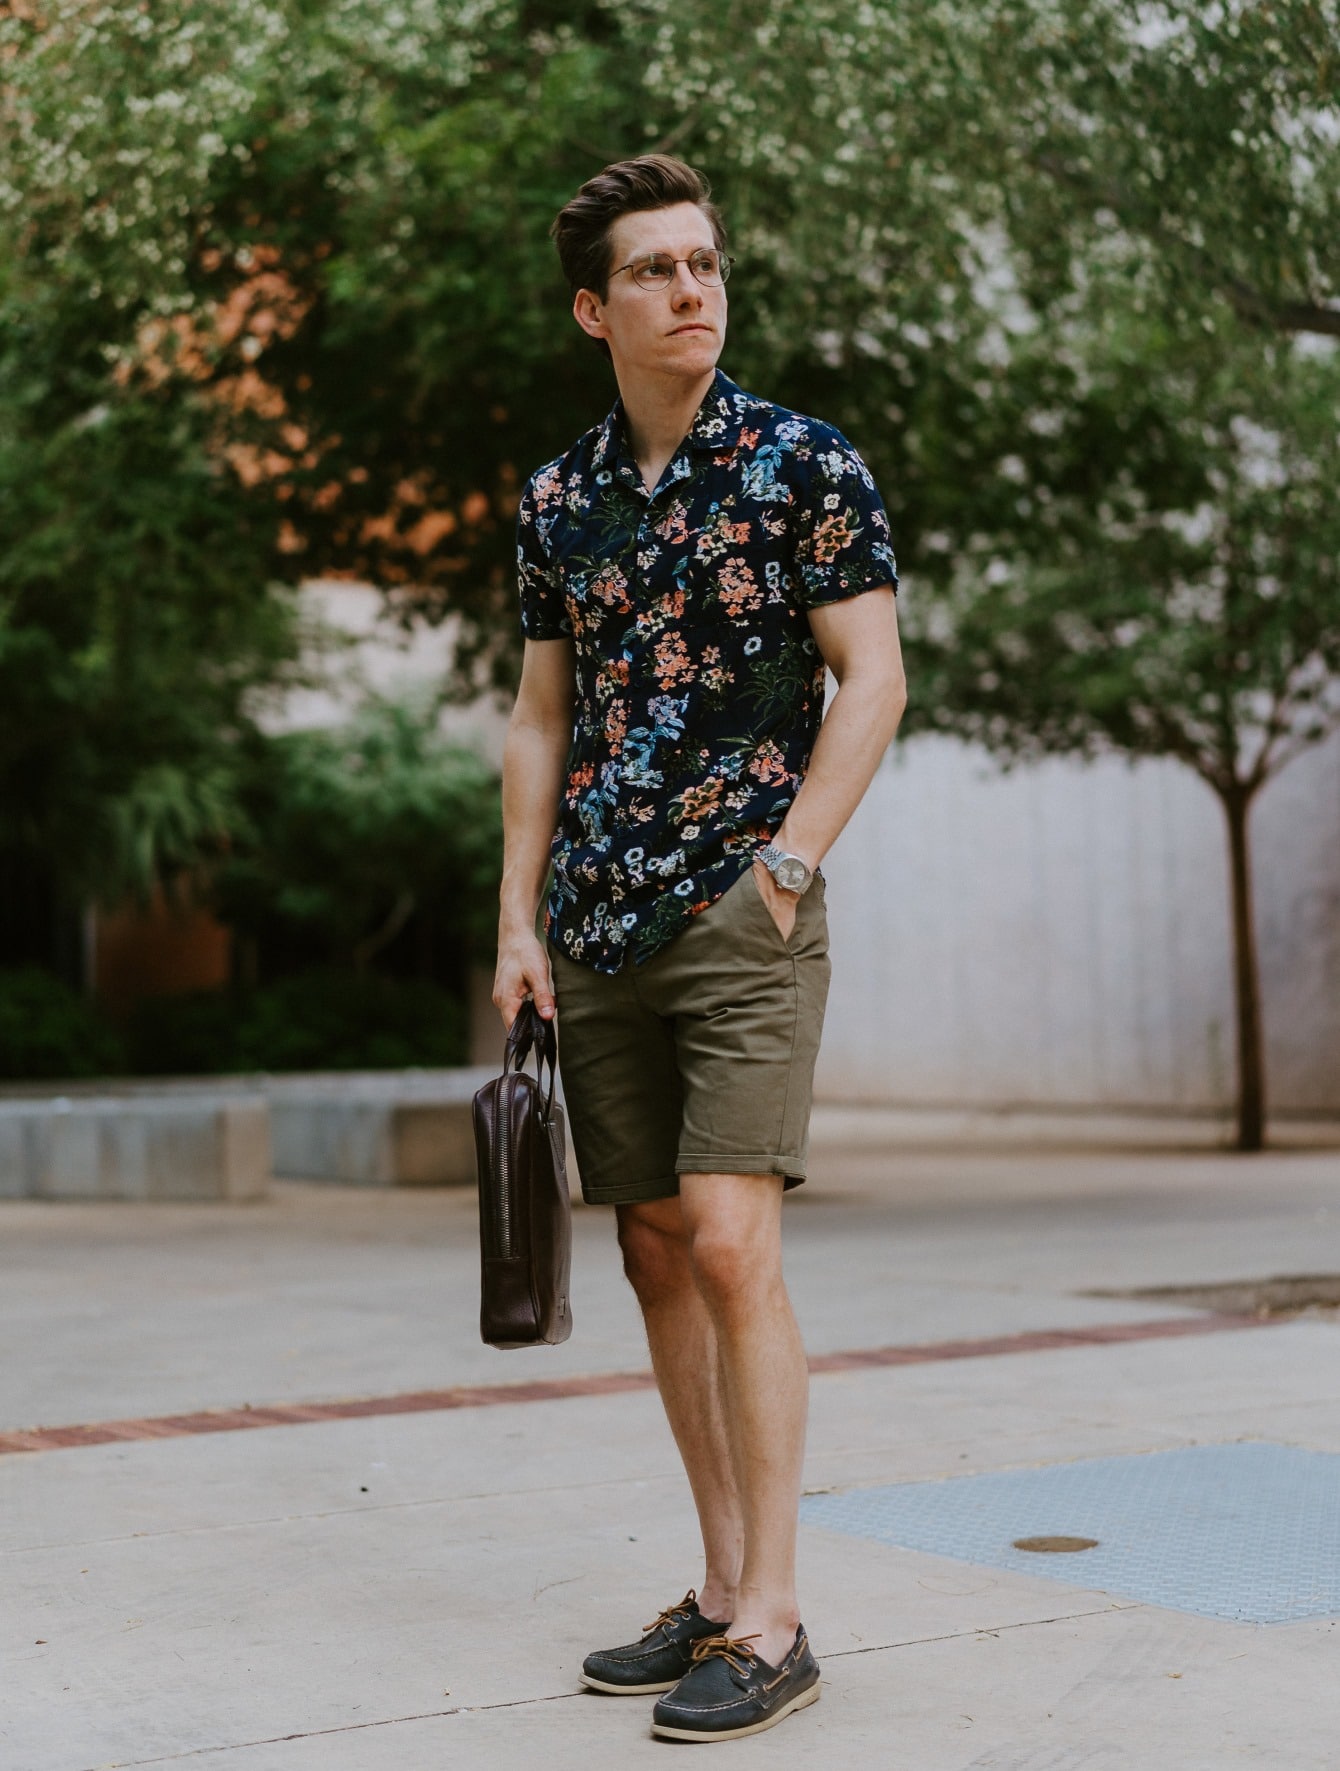 How to Wear Floral Prints: 13 Different Outfit Ideas for Men